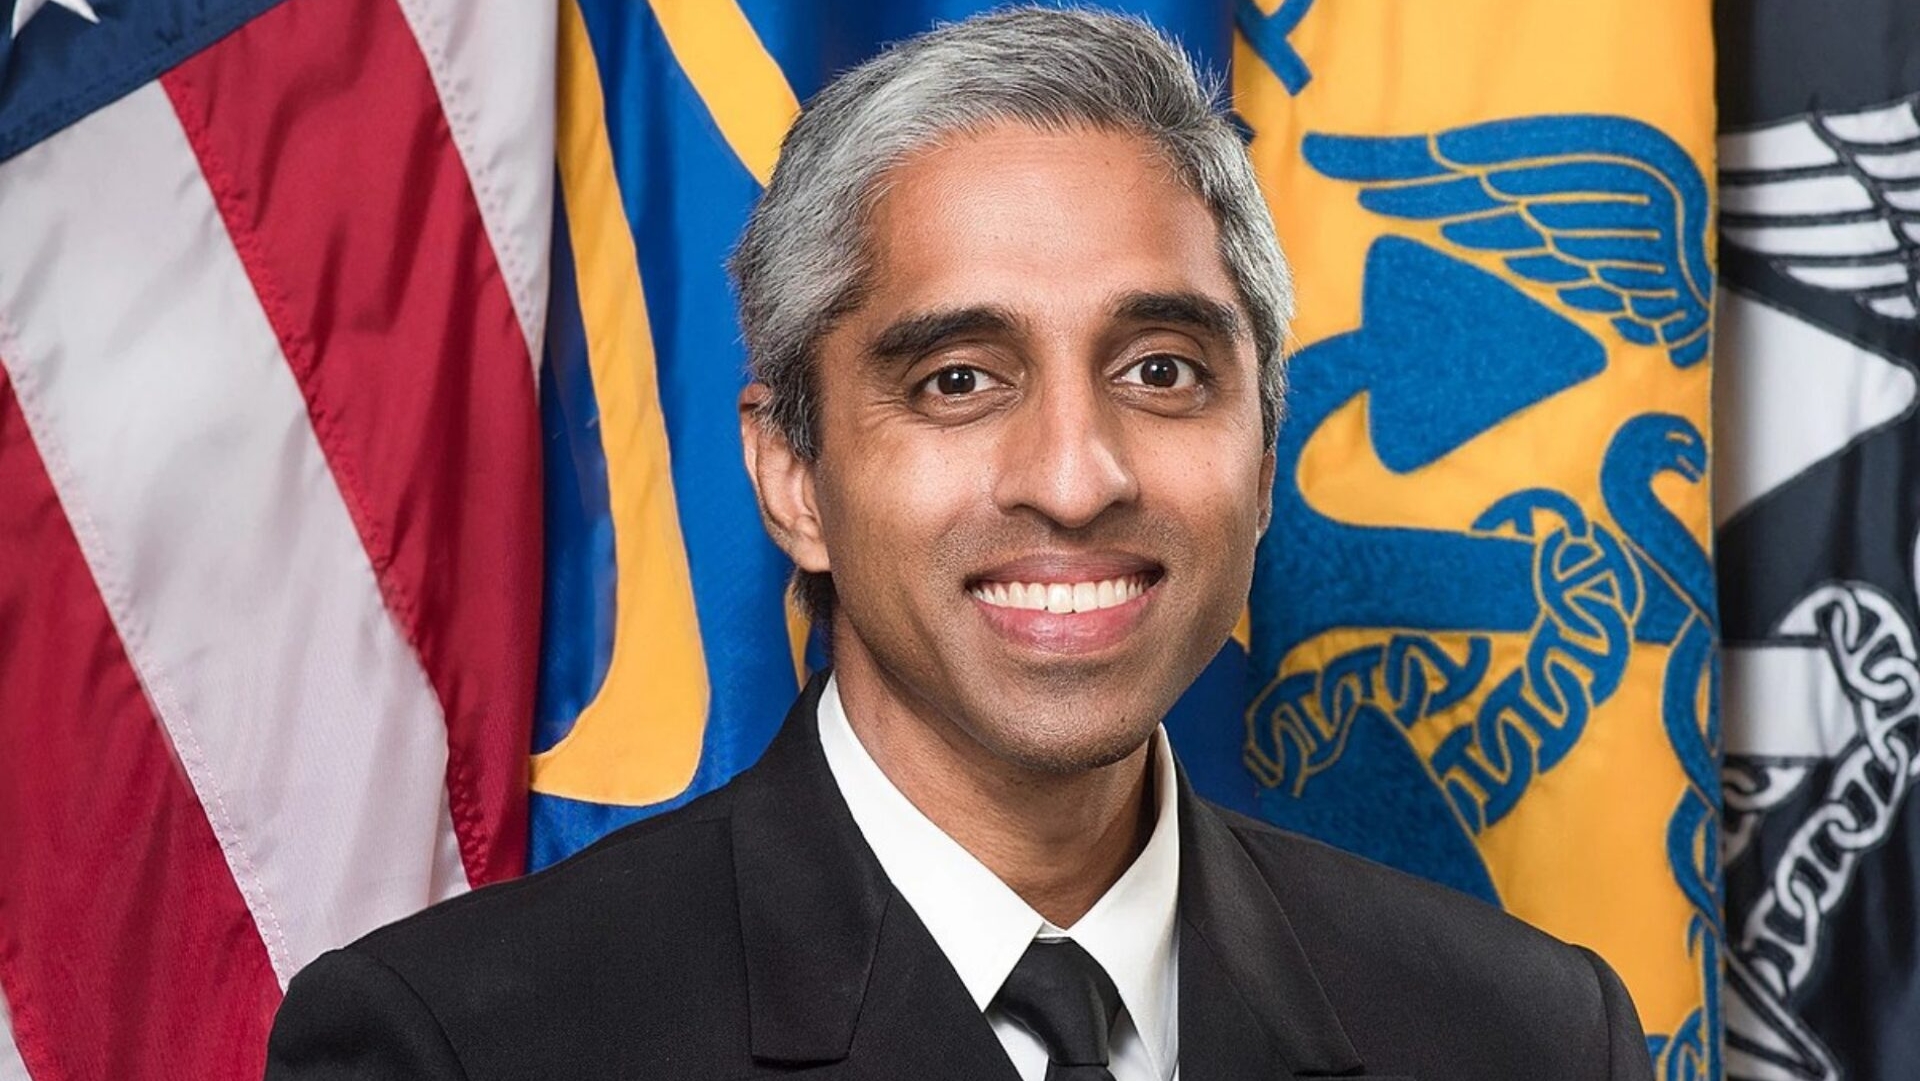 The U.S. Surgeon General Proposes Official Warning Labels for Social Media Apps